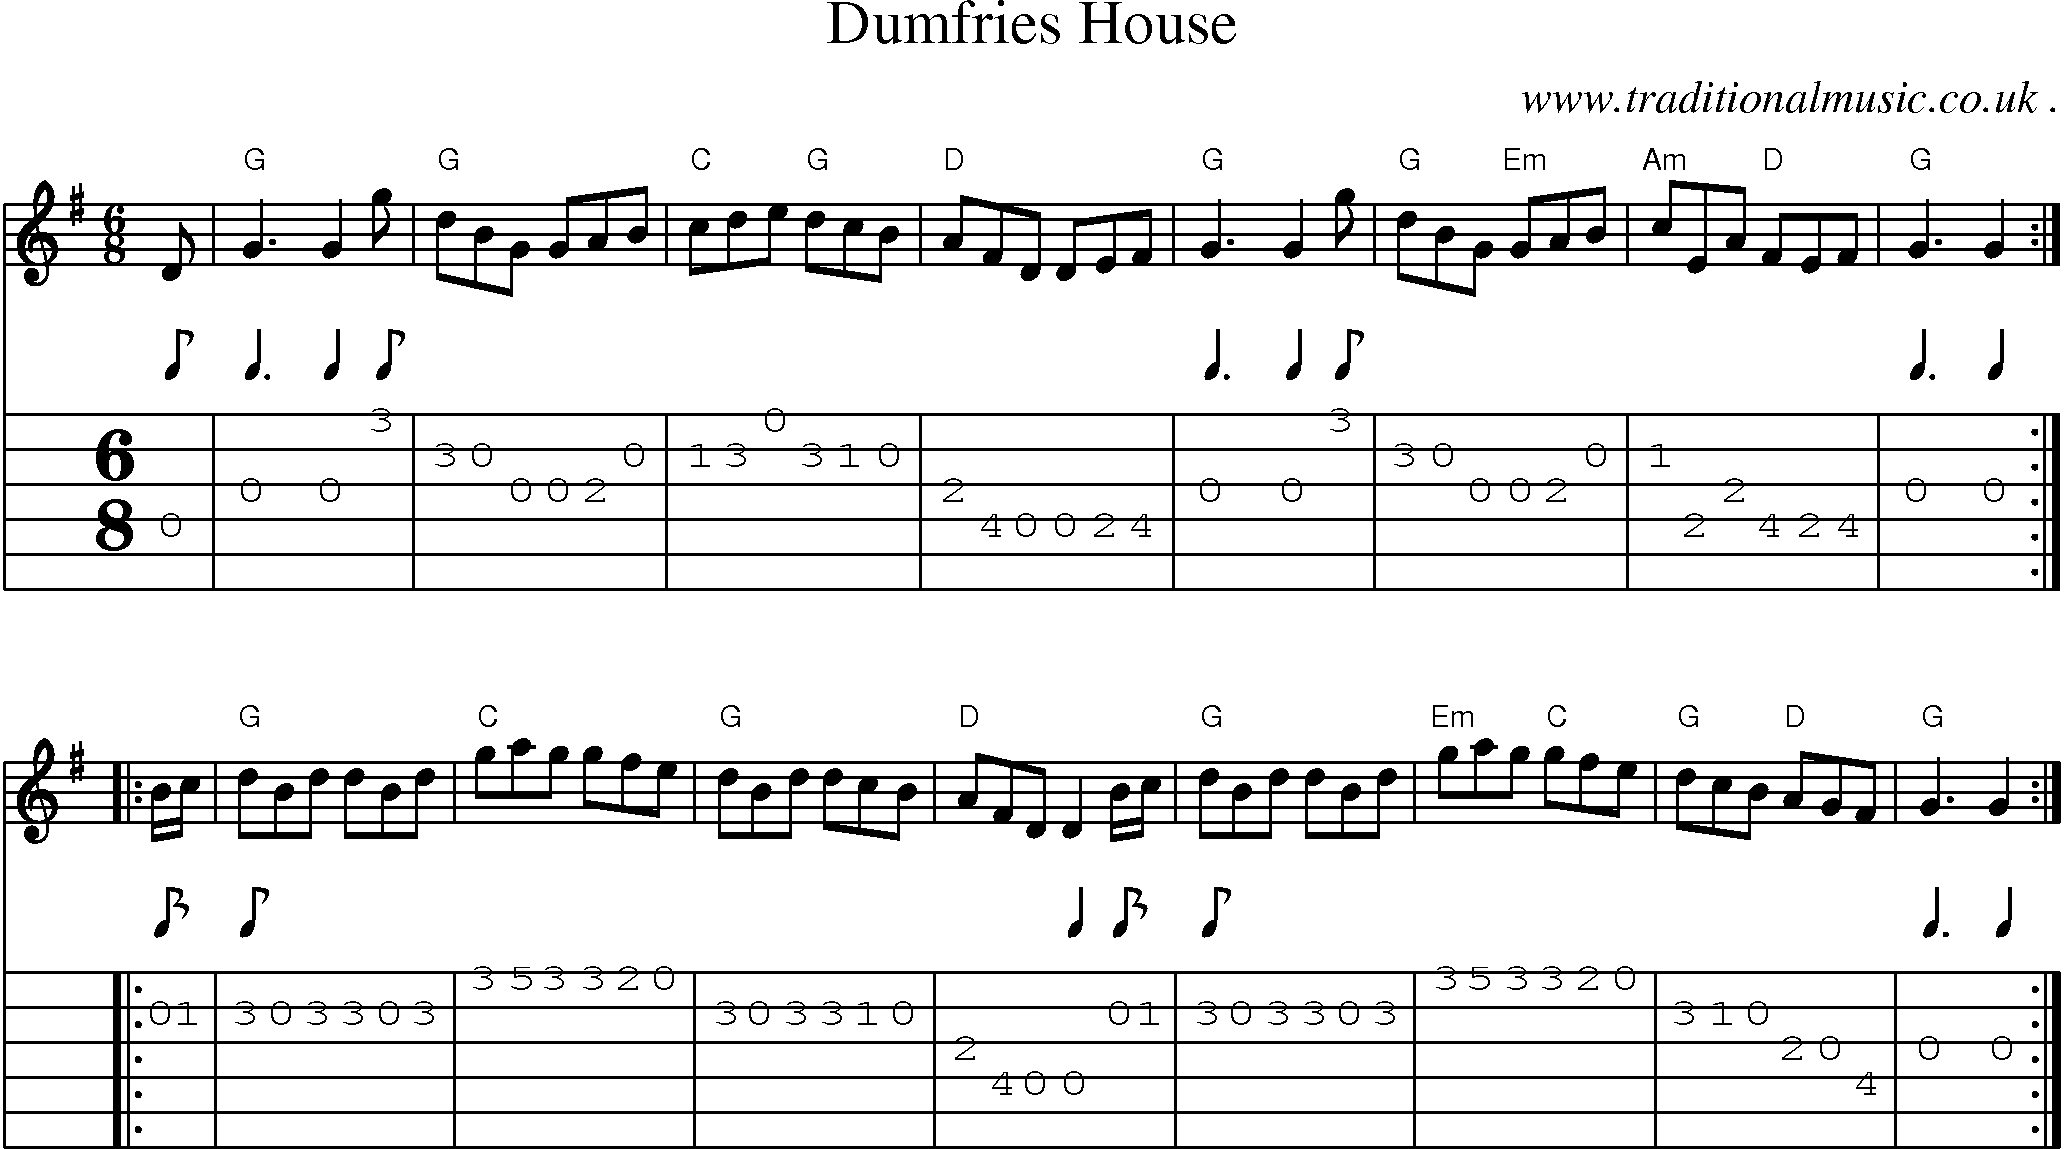 Sheet-music  score, Chords and Guitar Tabs for Dumfries House